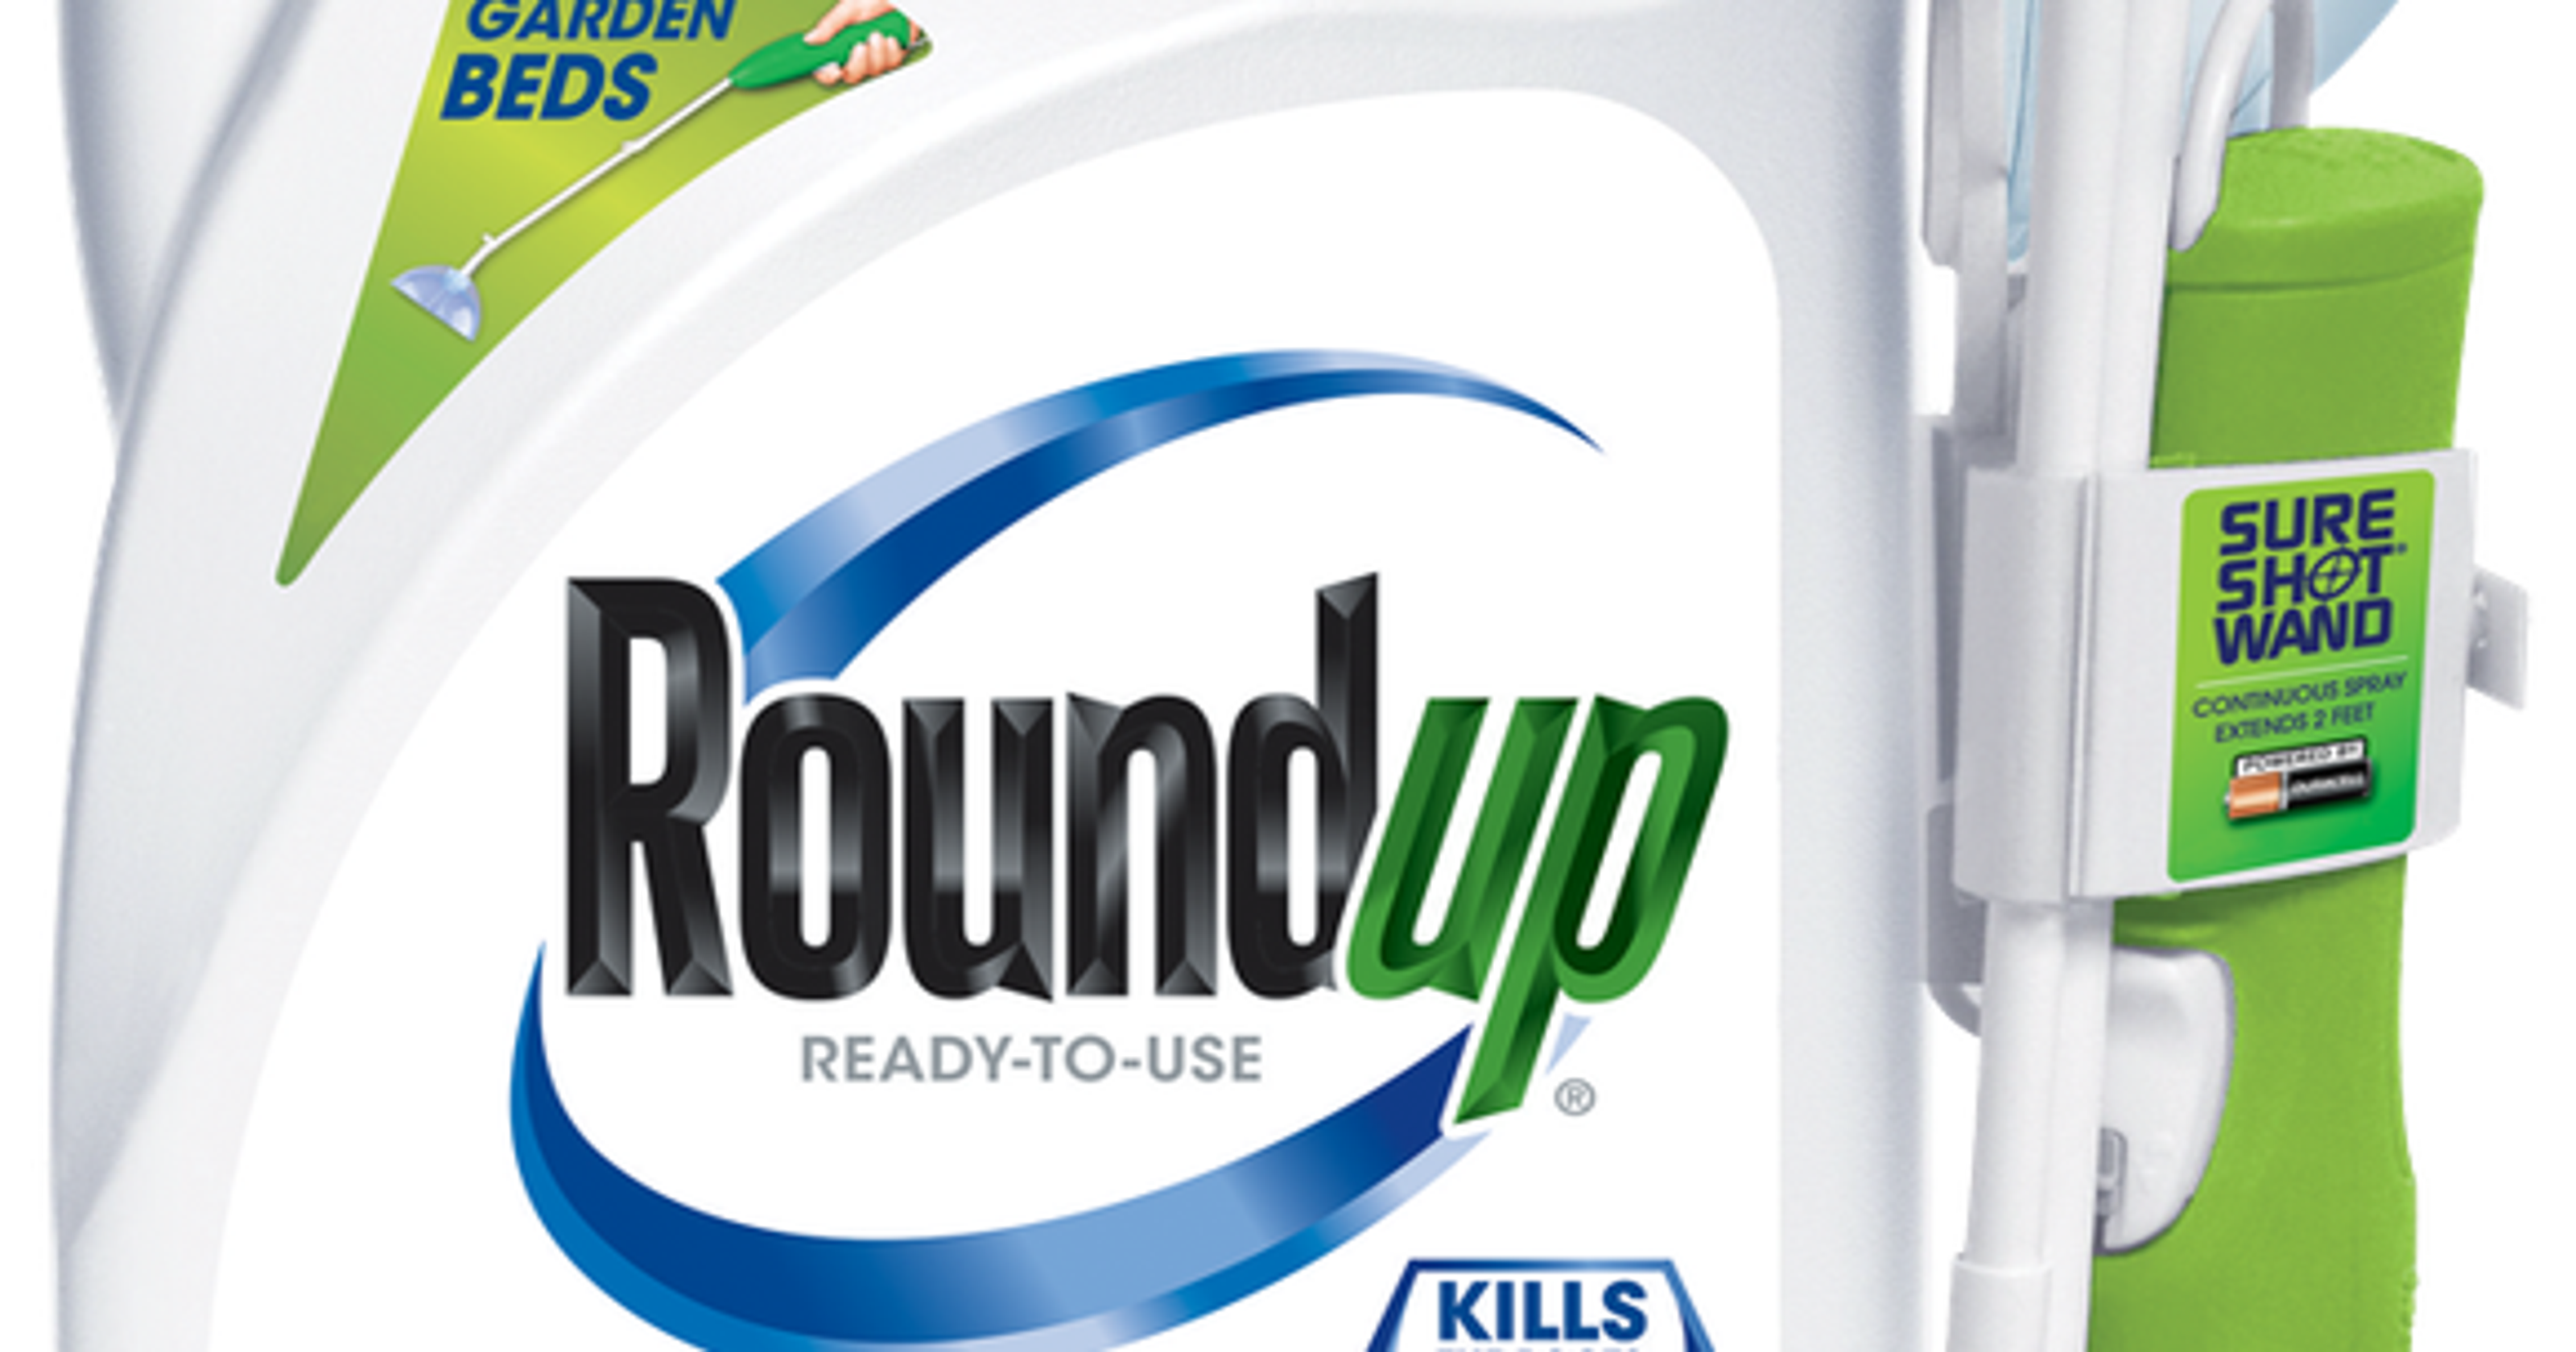 monsanto-ordered-to-pay-289-million-to-cancer-patient-in-roundup-lawsuit